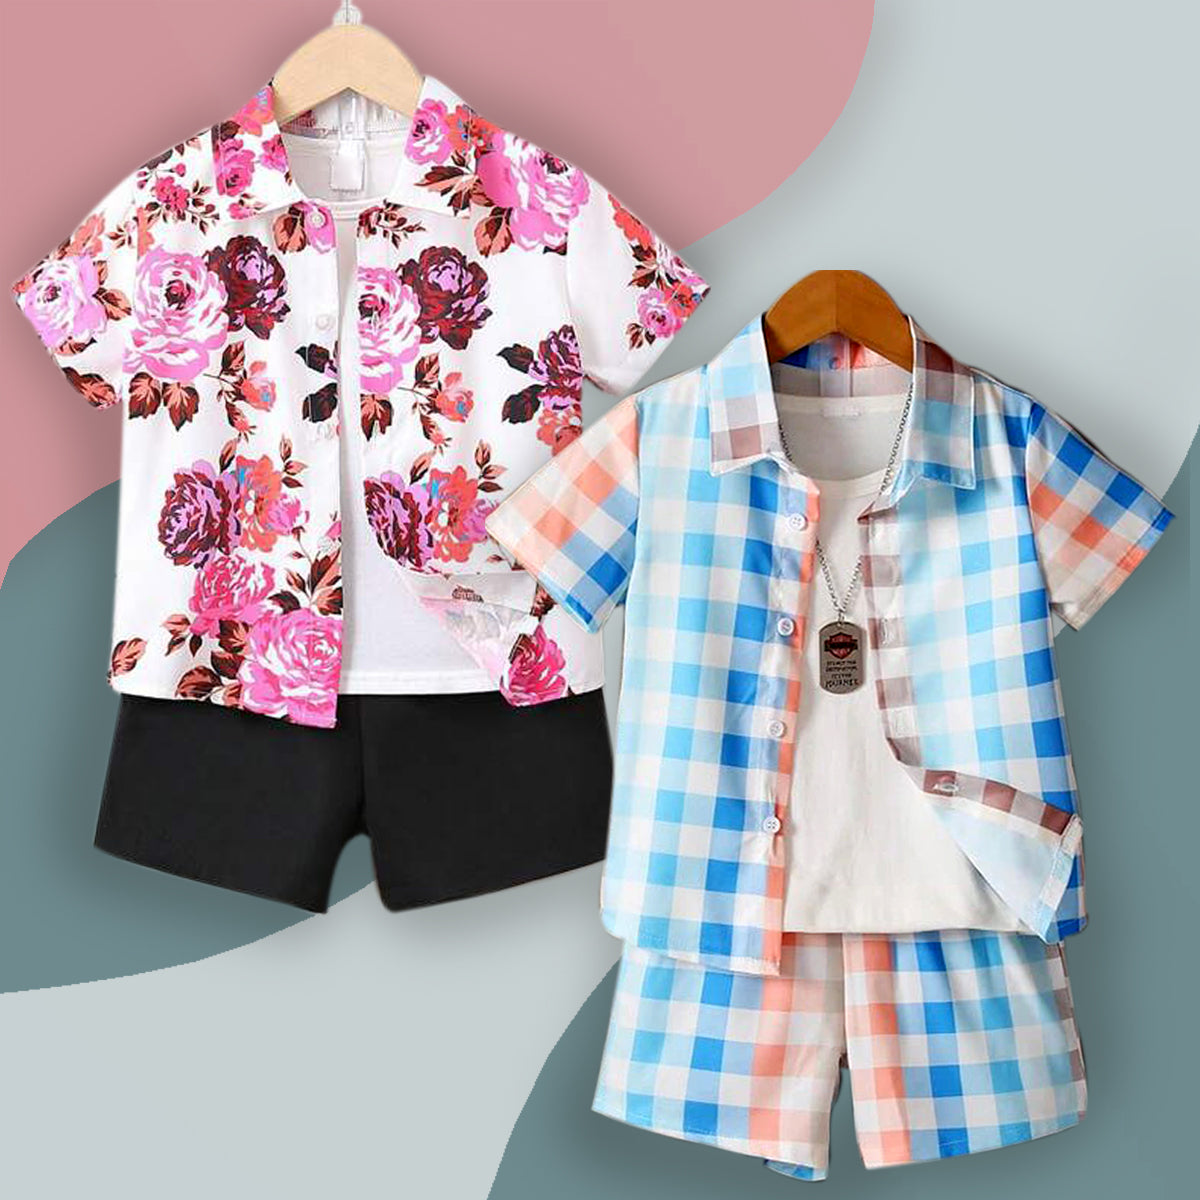 Venutaloza Baby Set Florals & Sunshine Plaid Turn Down Collar (Combo Pack Of 2) Shirt & Shorts Without tee Two Piece Set For Boy & Girls.